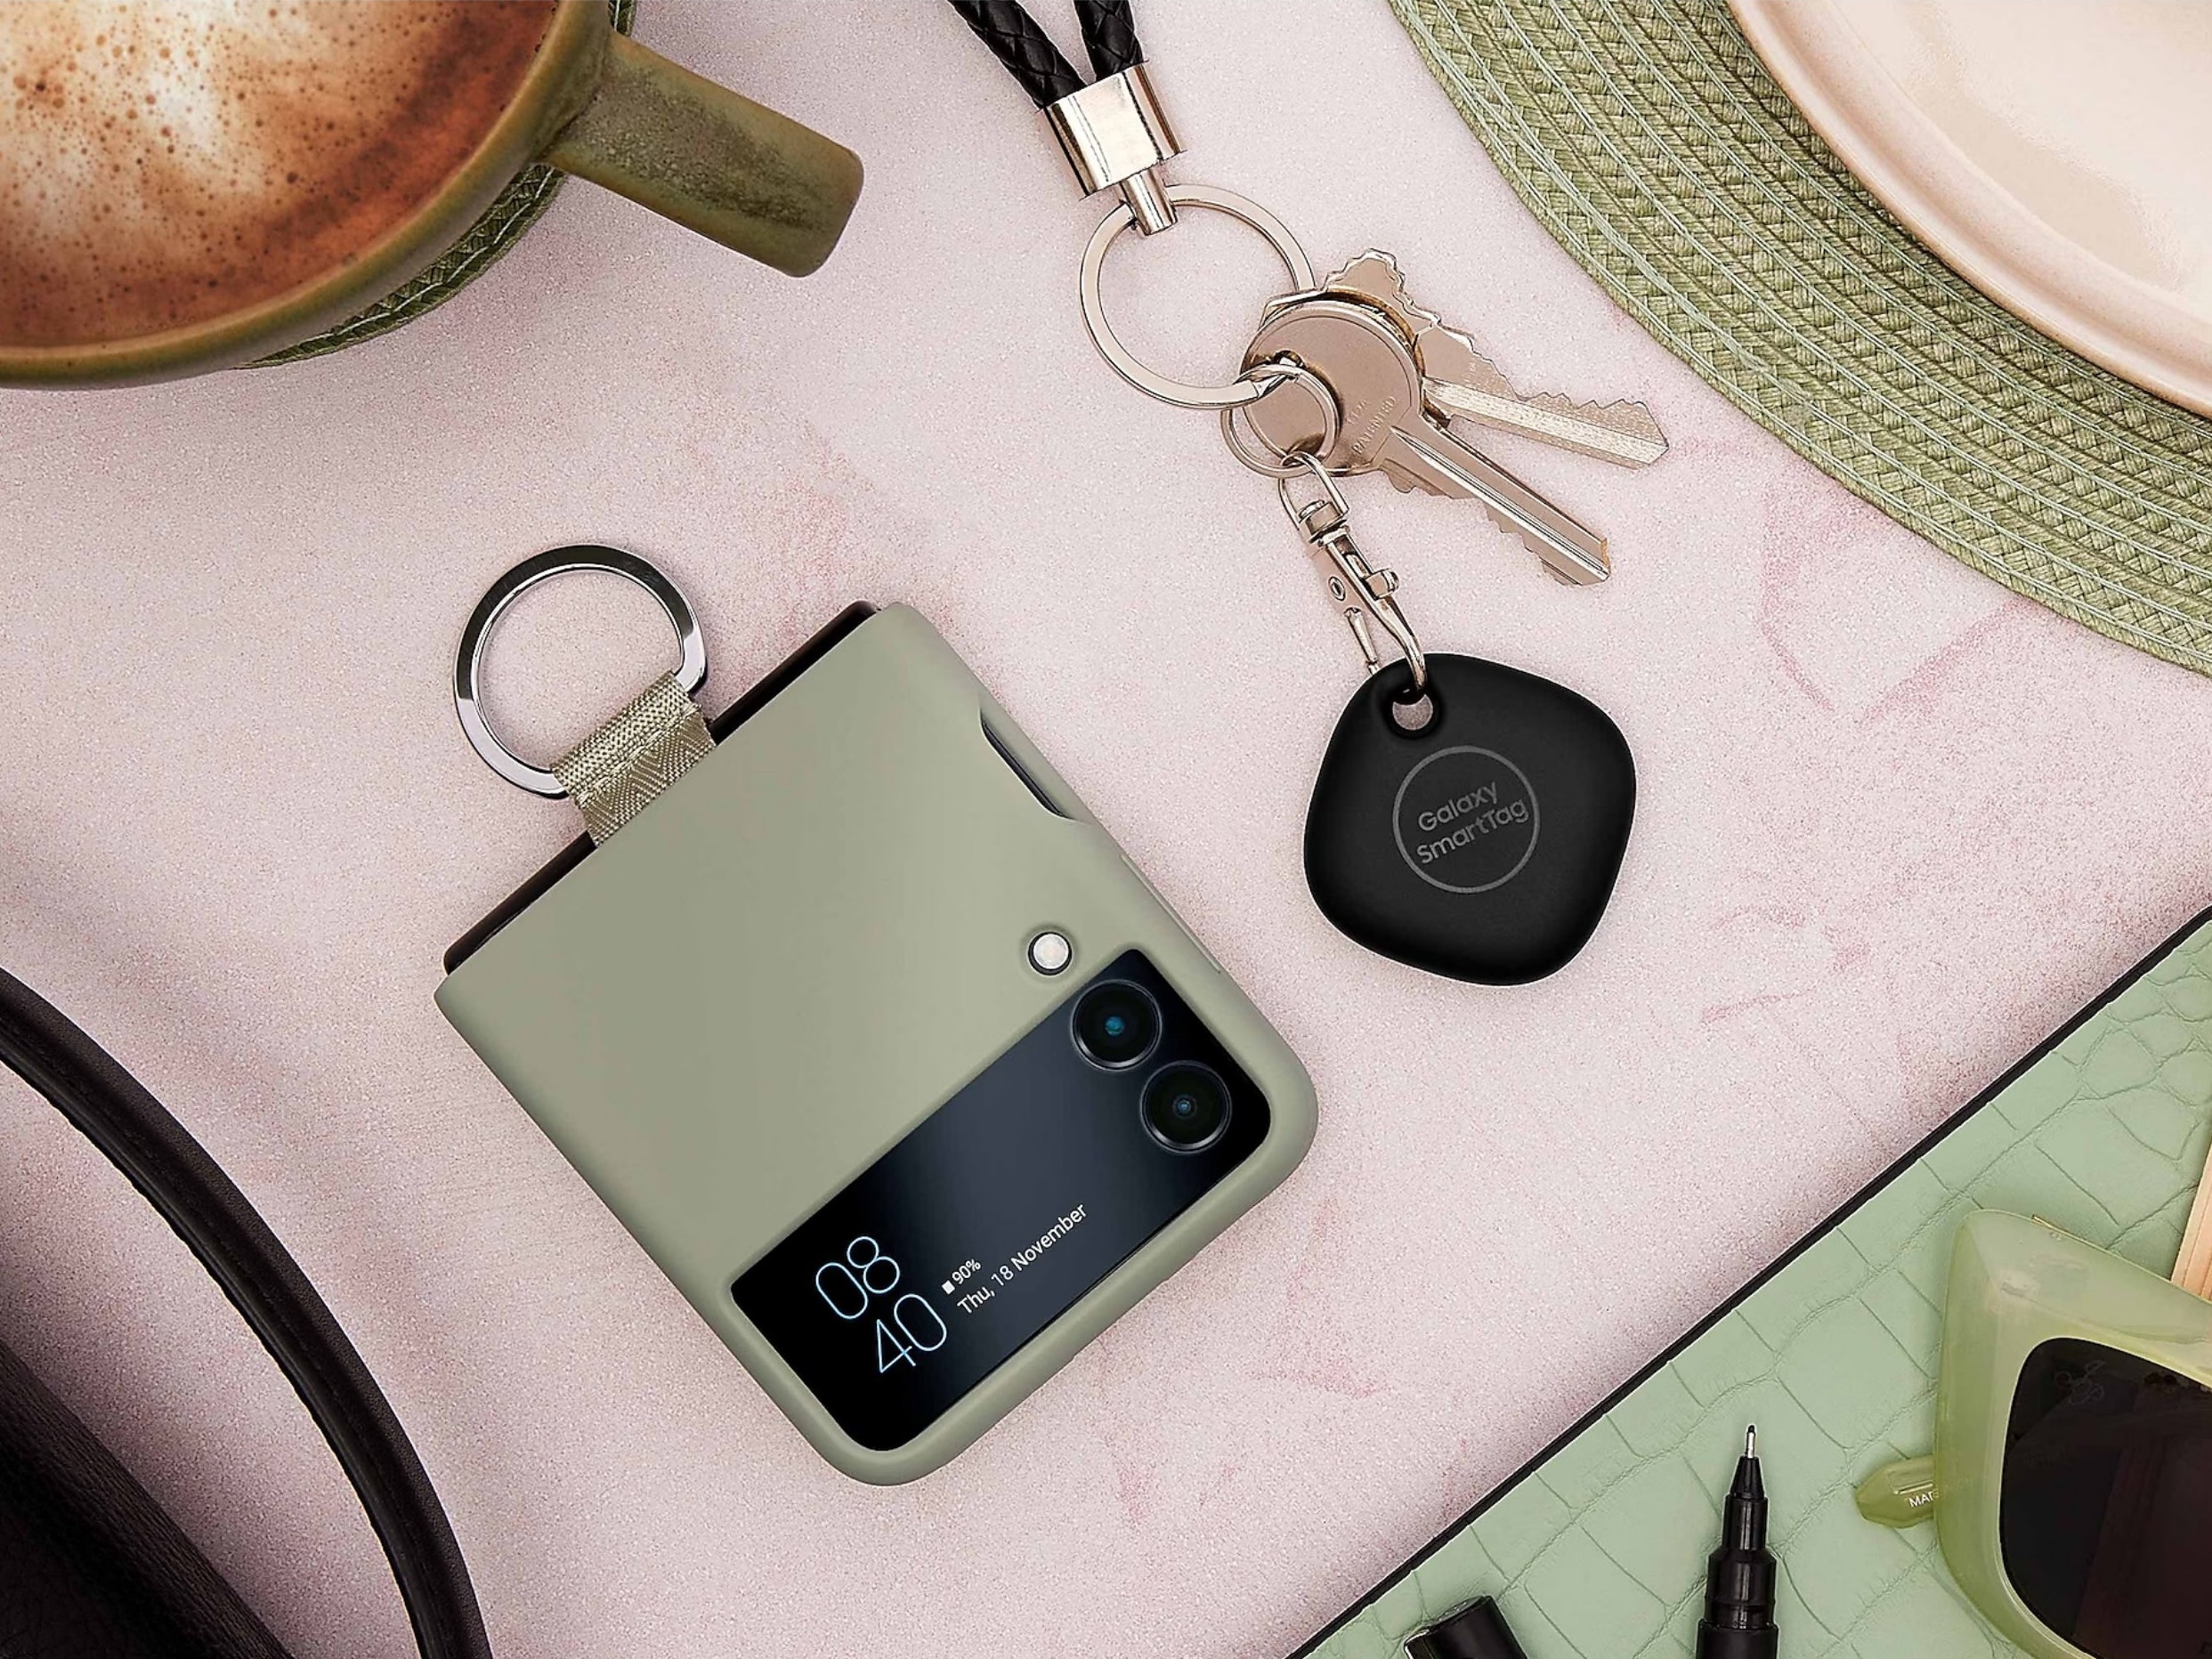 Samsung's Galaxy SmartTag 2 Tracker Gets 2-year Battery Life and